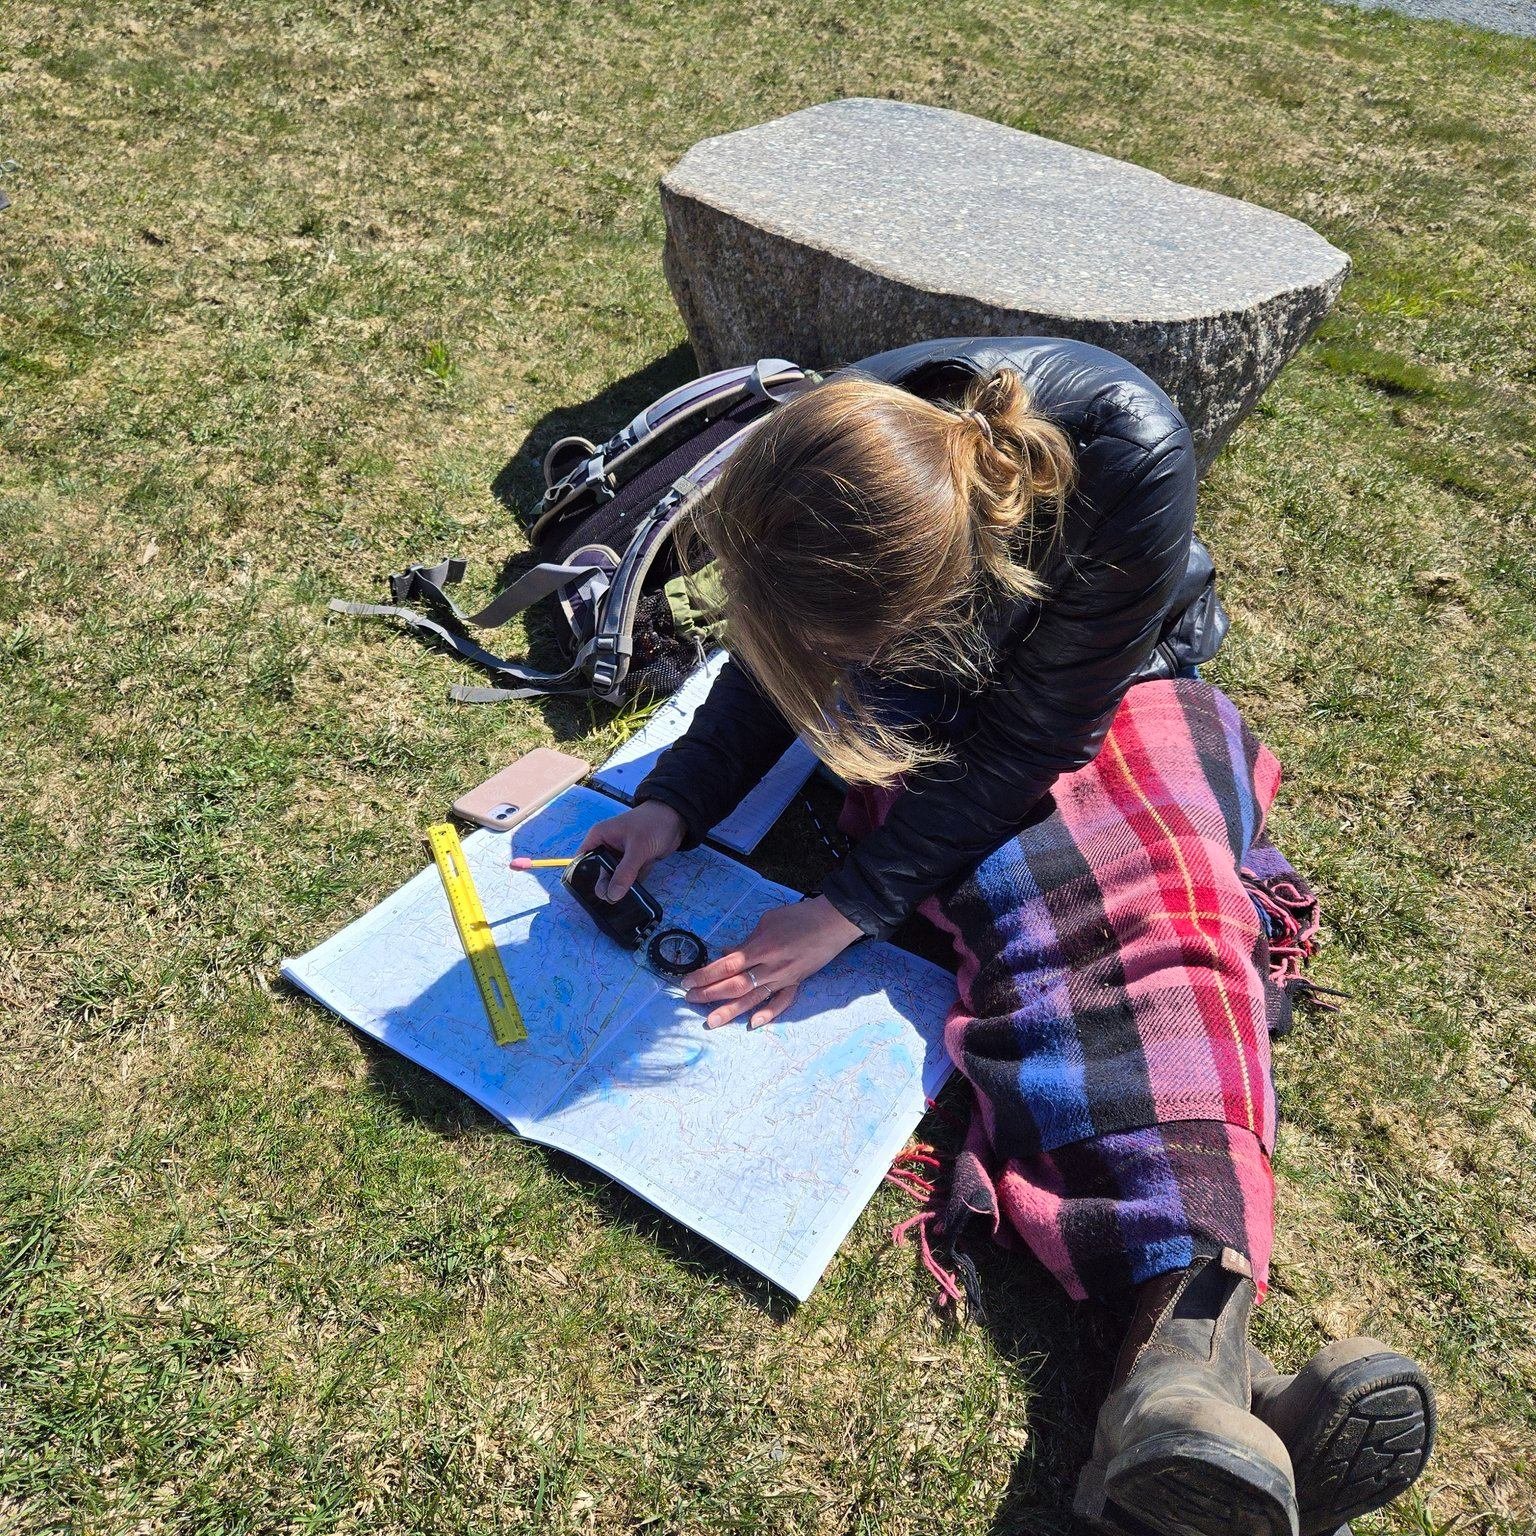 Did you miss our two-day Orienteering Workshop? Don't worry, you can join us on Saturday, May 11th for our Mother's Day Mapping event. 

FMI visit link in bio

 #placebasededucation #outdoorschool #outdooreducation #downeastmaine #maineoutdoors